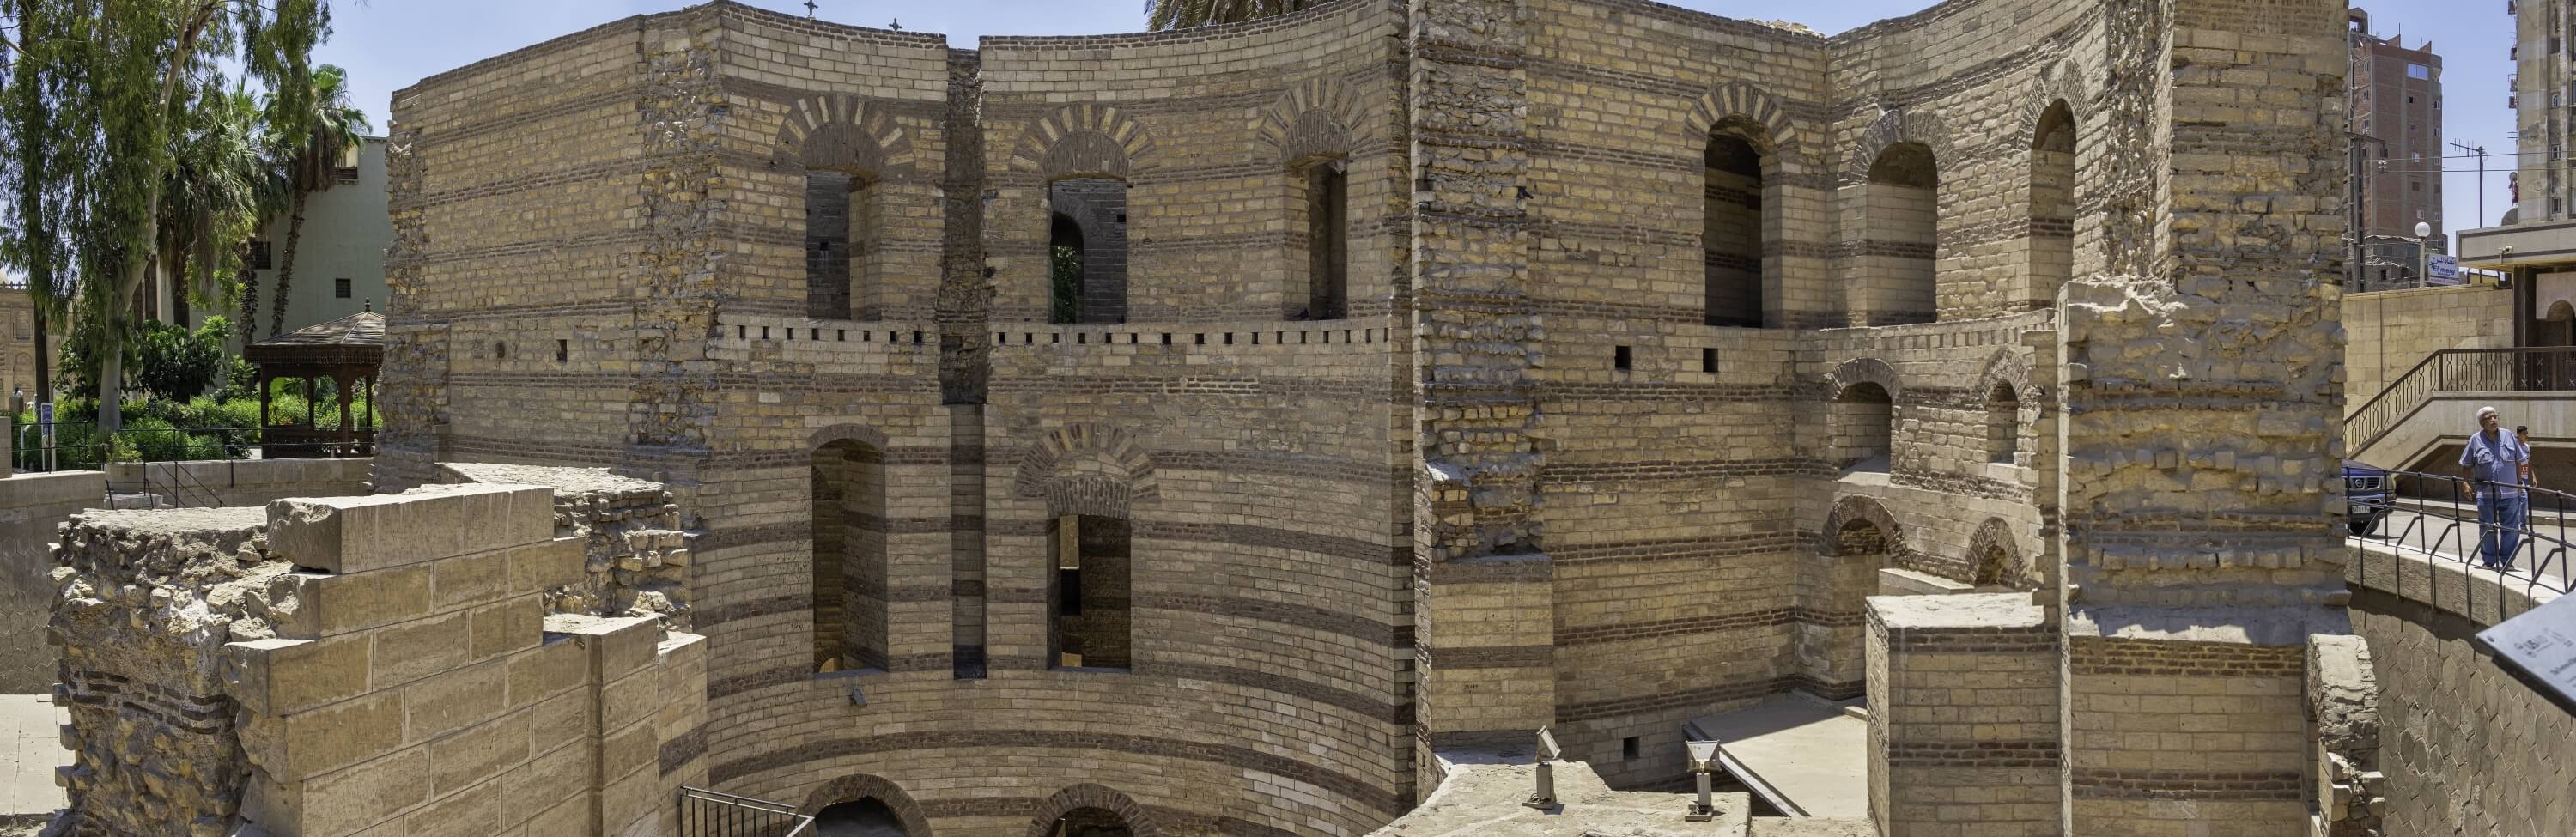 Panoramic view of Babylon Fortress in Cairo, Egypt